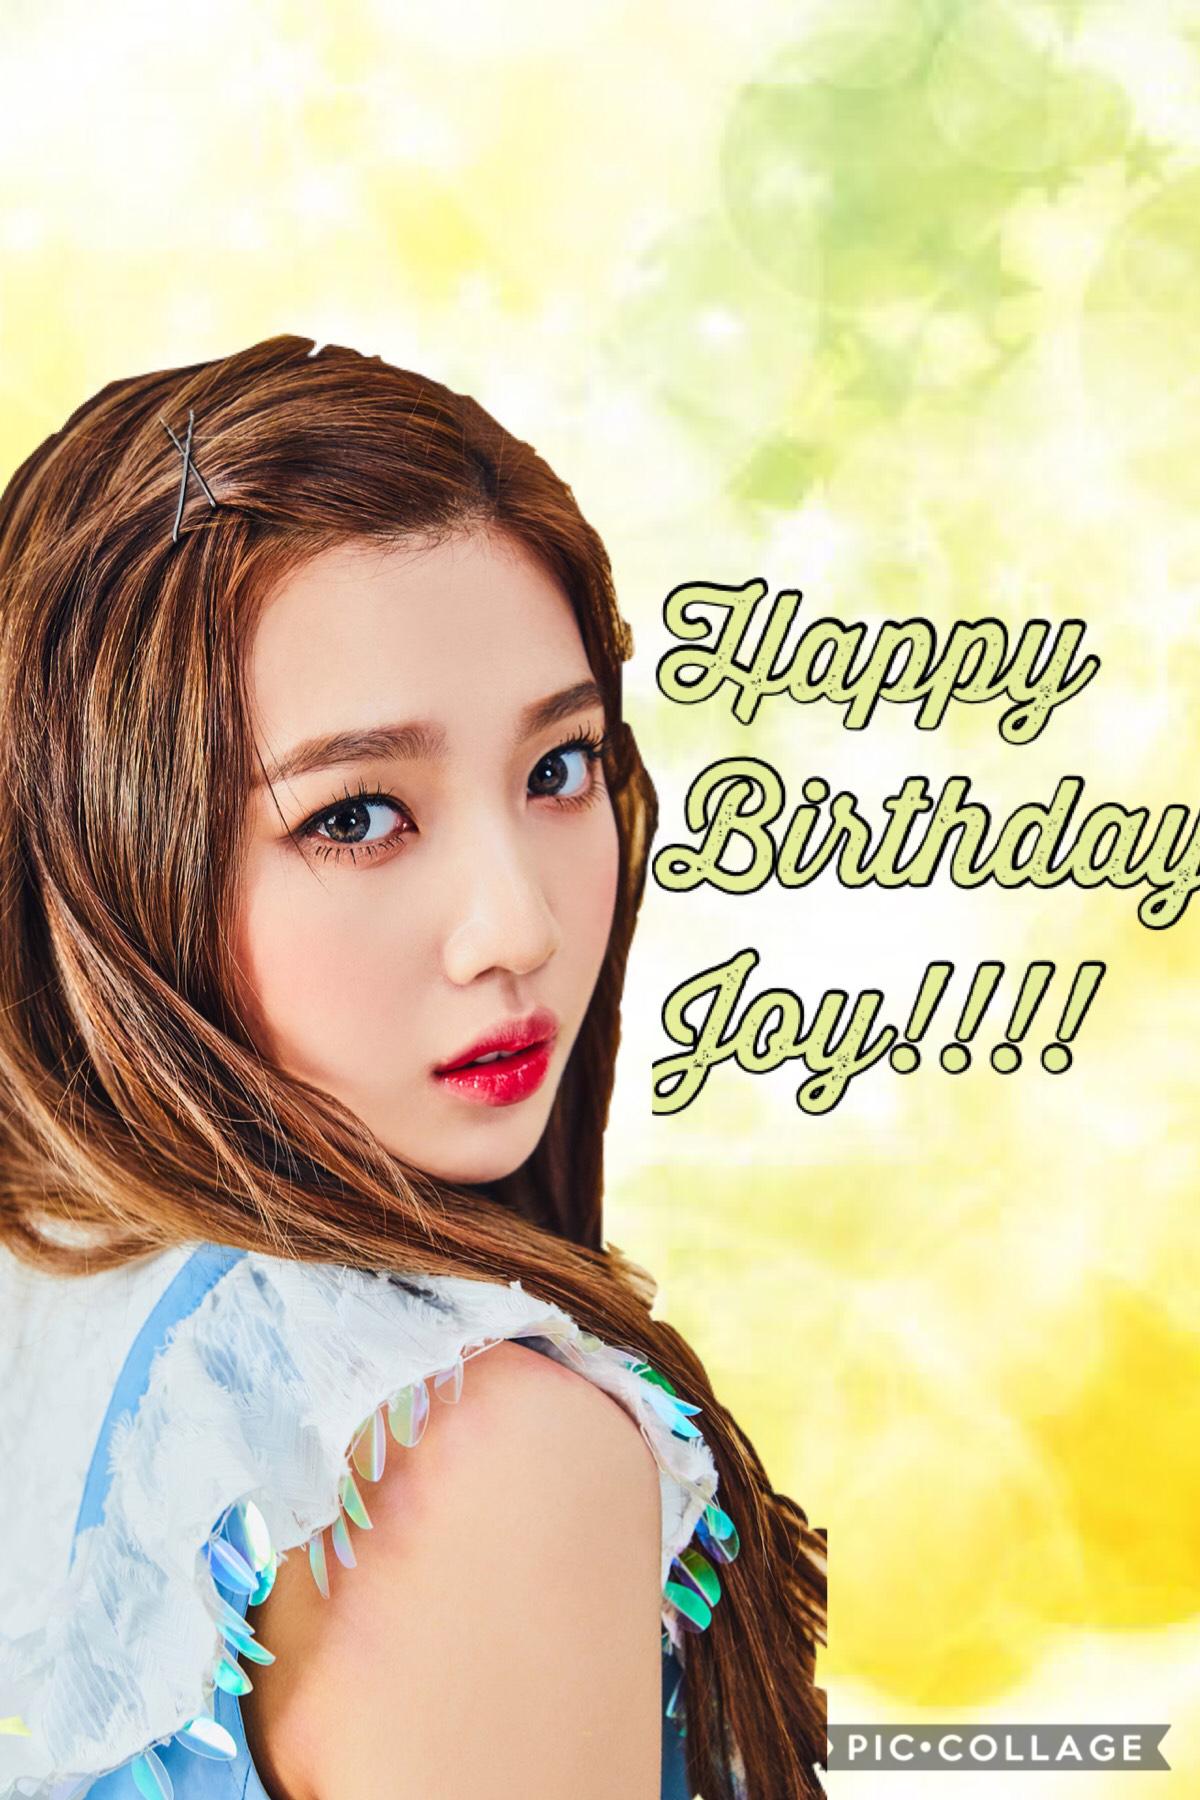 This is my first edit and I’d thought I’d do it for Joy’s birthday

